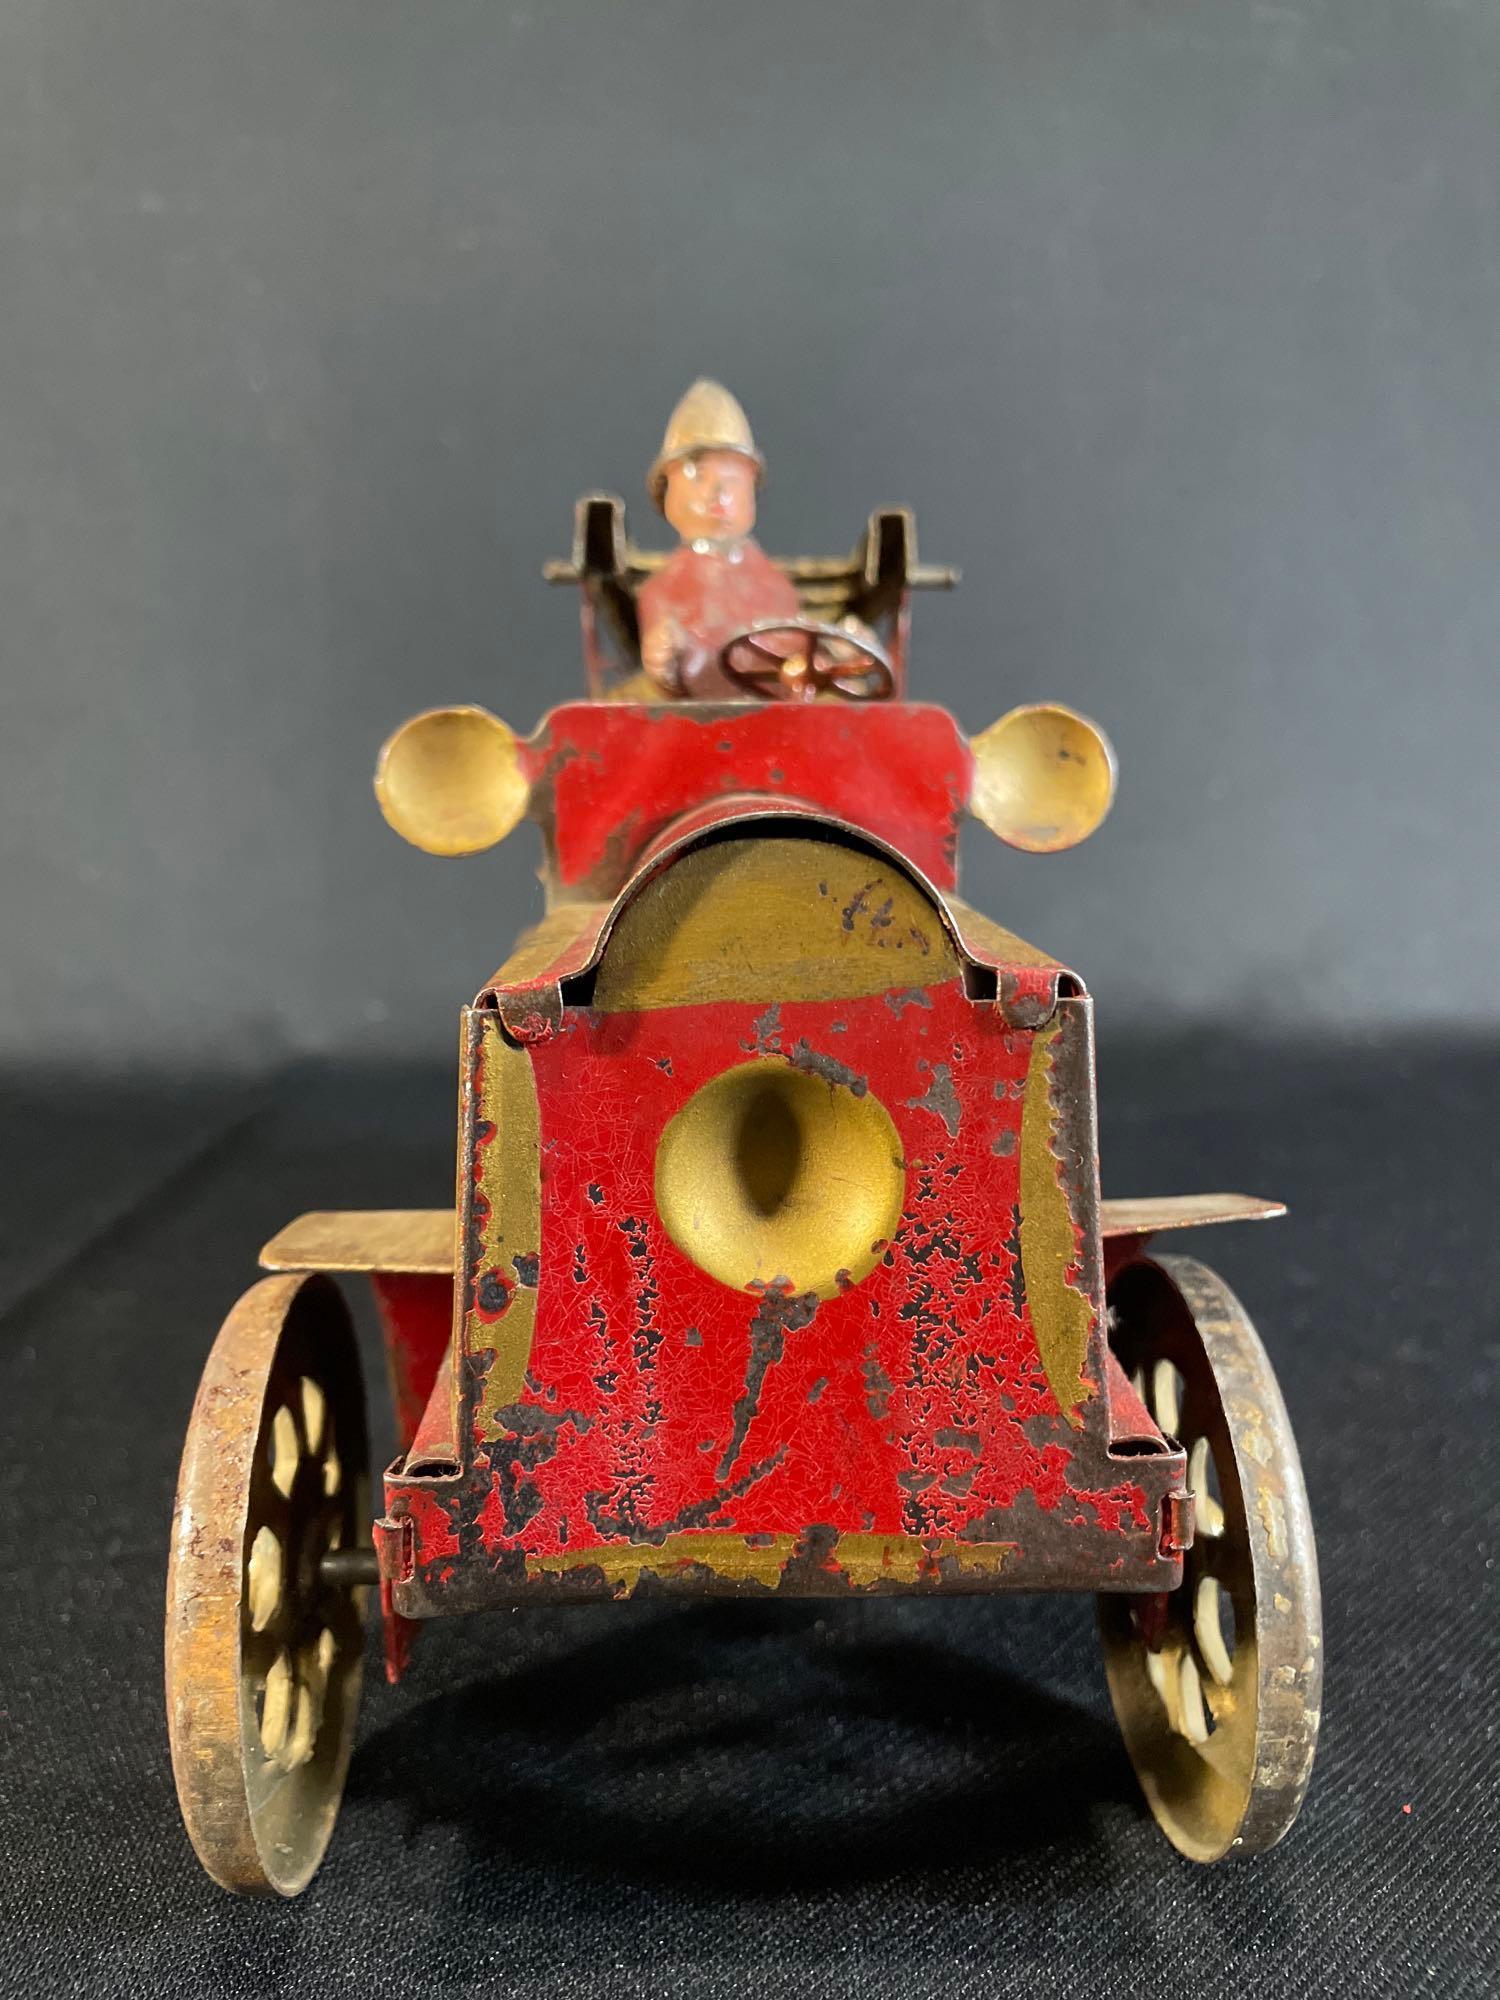 Antique pressed steel hill climber fire engine